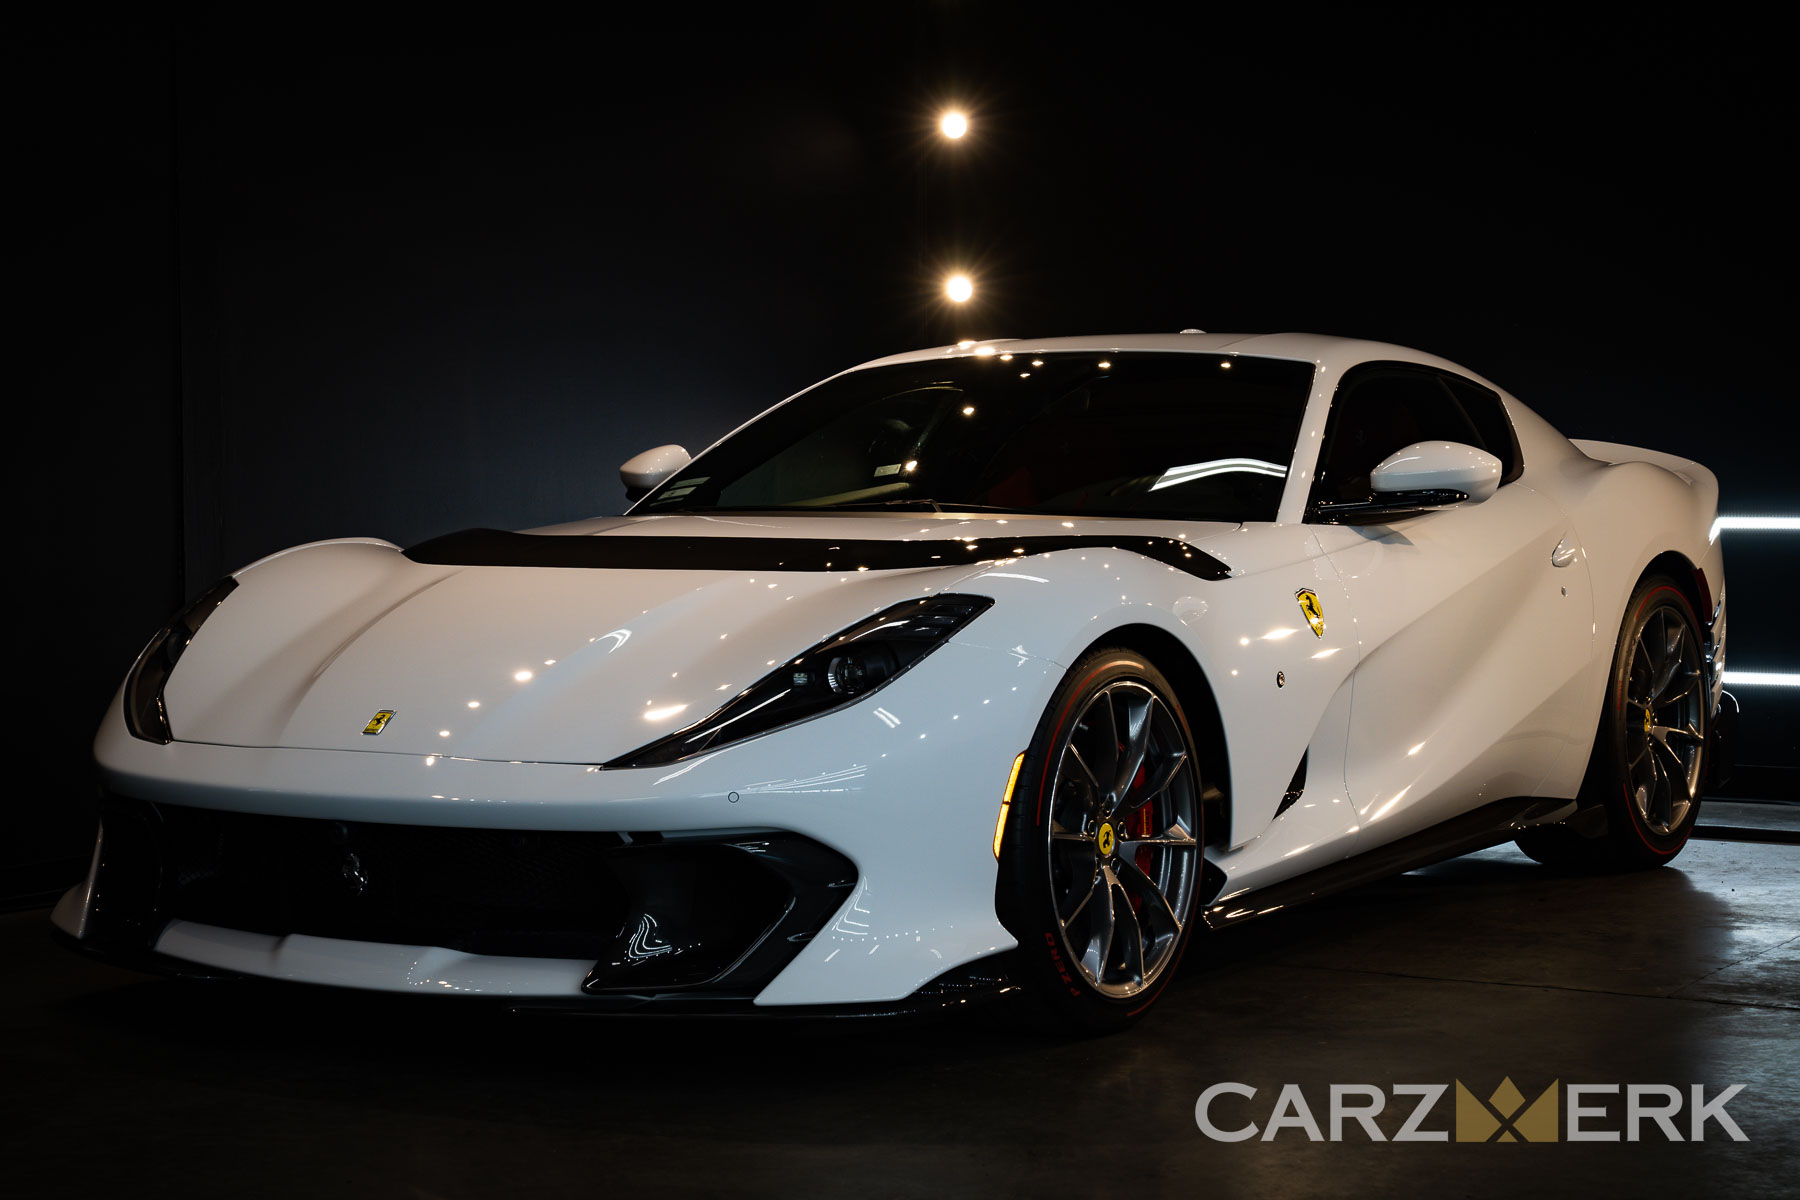 2022 Ferrari 812 Competizione - Bianco Cervino - After New Car Prep - Paint Correction - Paint Protection Film and Ceramic Coating